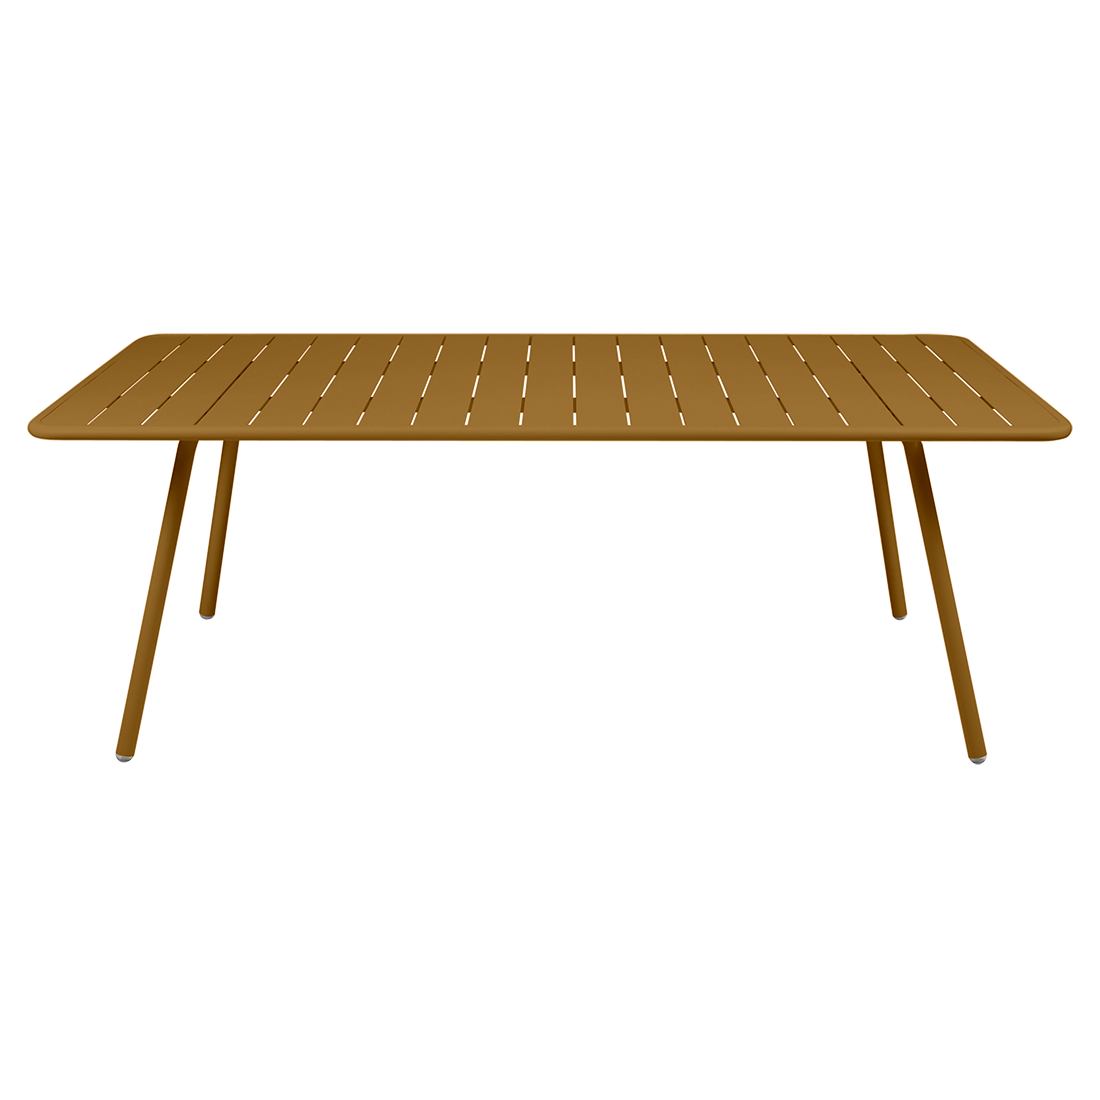 LUXEMBOURG TABLE 207 X 100 CM